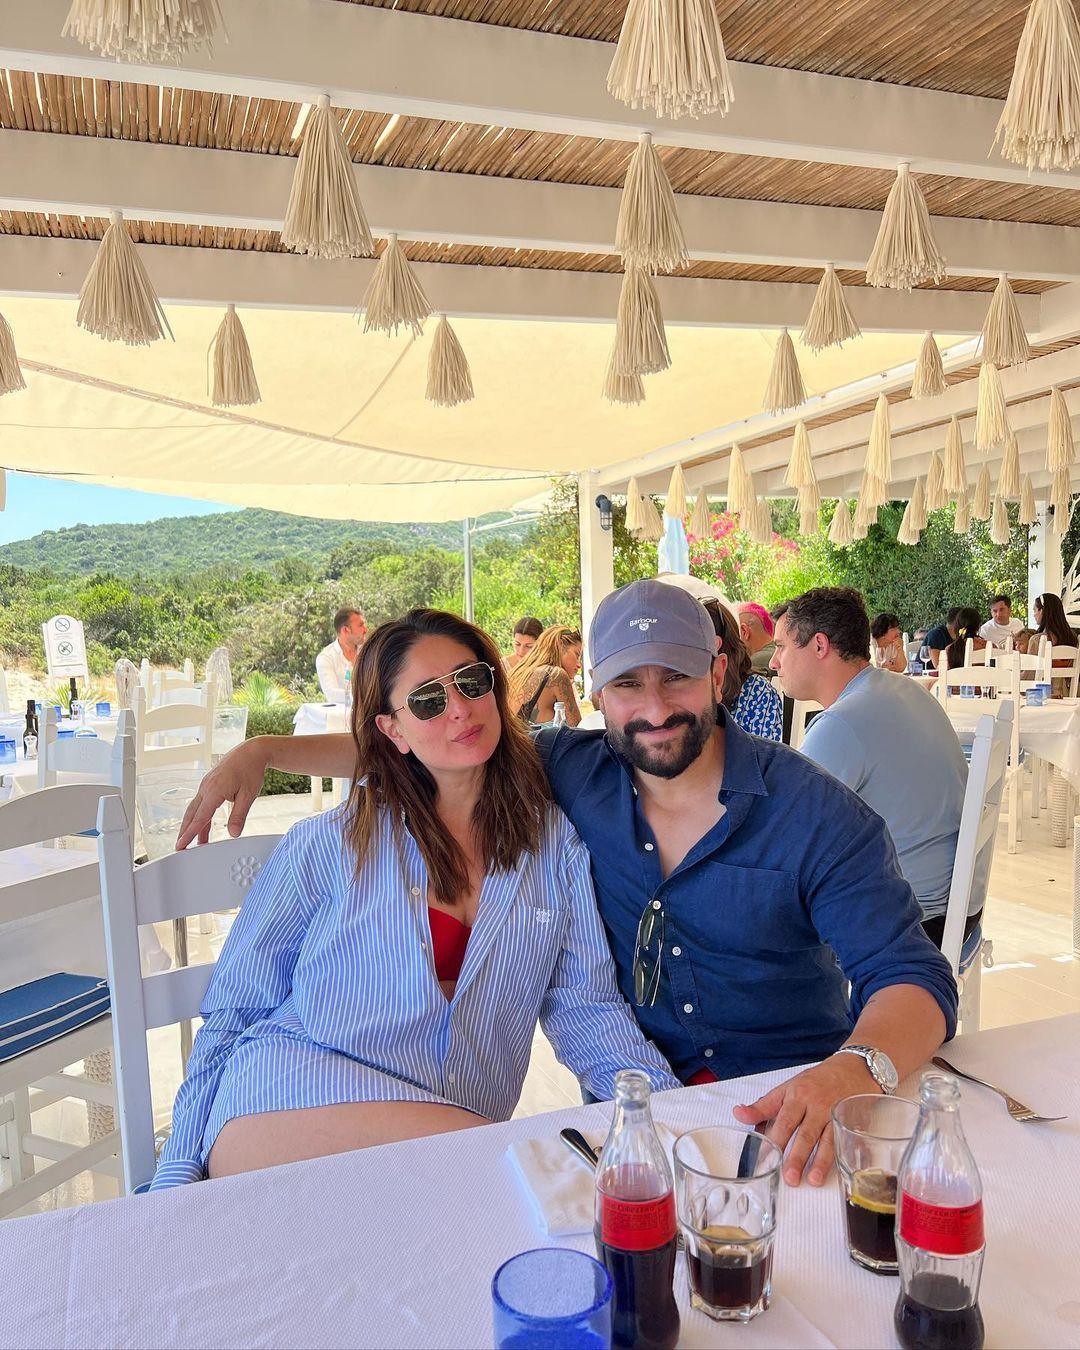 Such a cutie. Kareena Kapoor and Saif Ali Khan always wow us with their cute pictures. This one is from their summer getaway to Italy